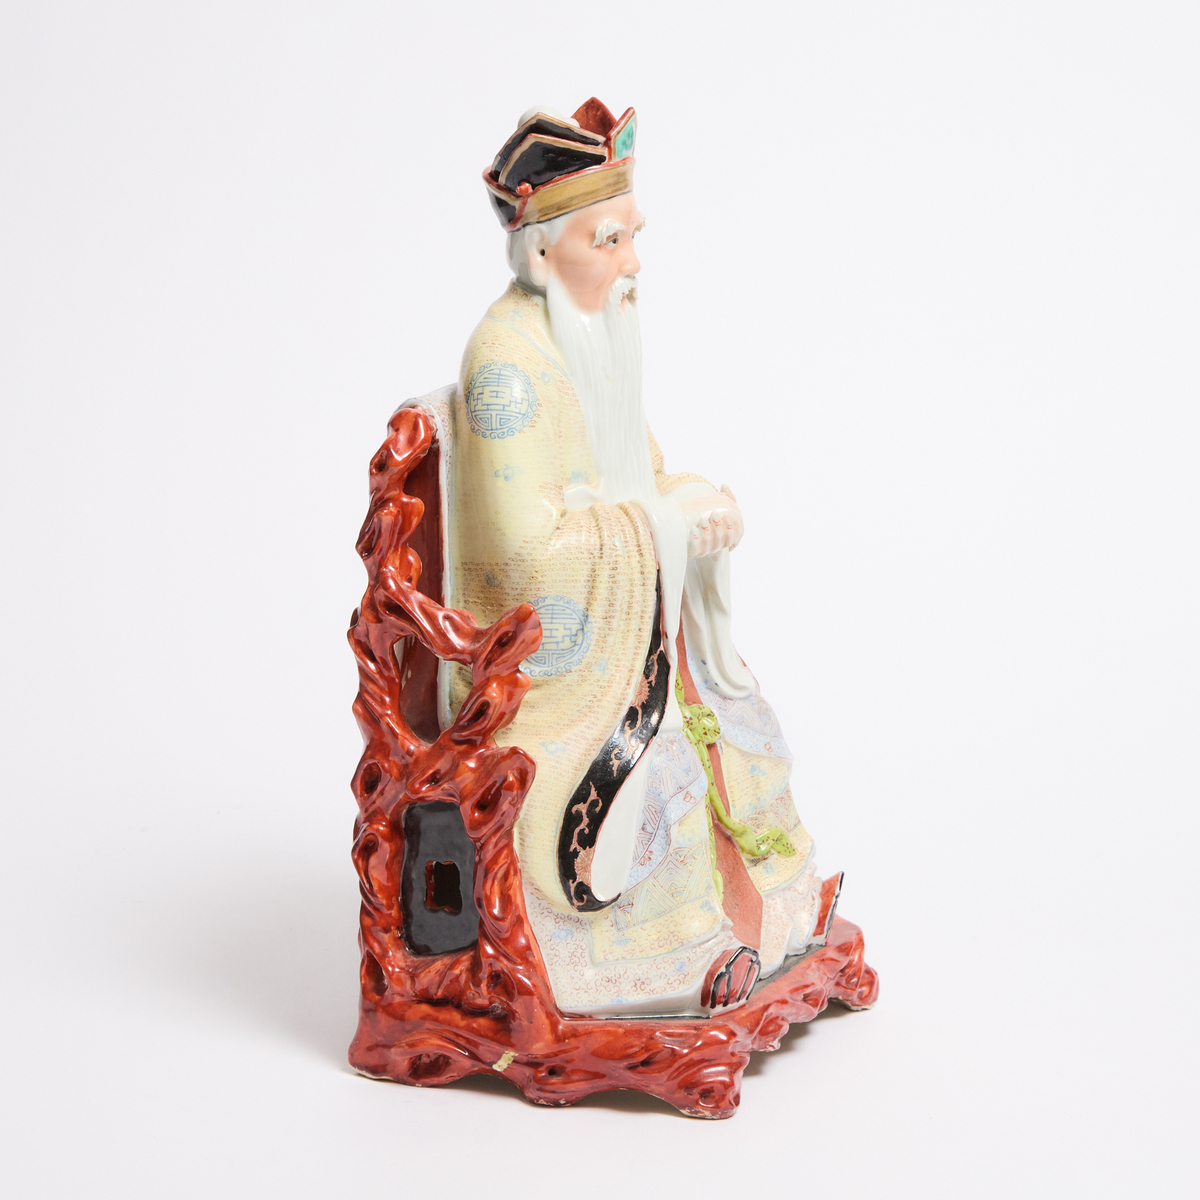 A Large Famille Rose Figure of a Daoist Immortal, Republican Period (1912-1949), 民国 大型瓷塑道教天君像, heigh - Image 2 of 4